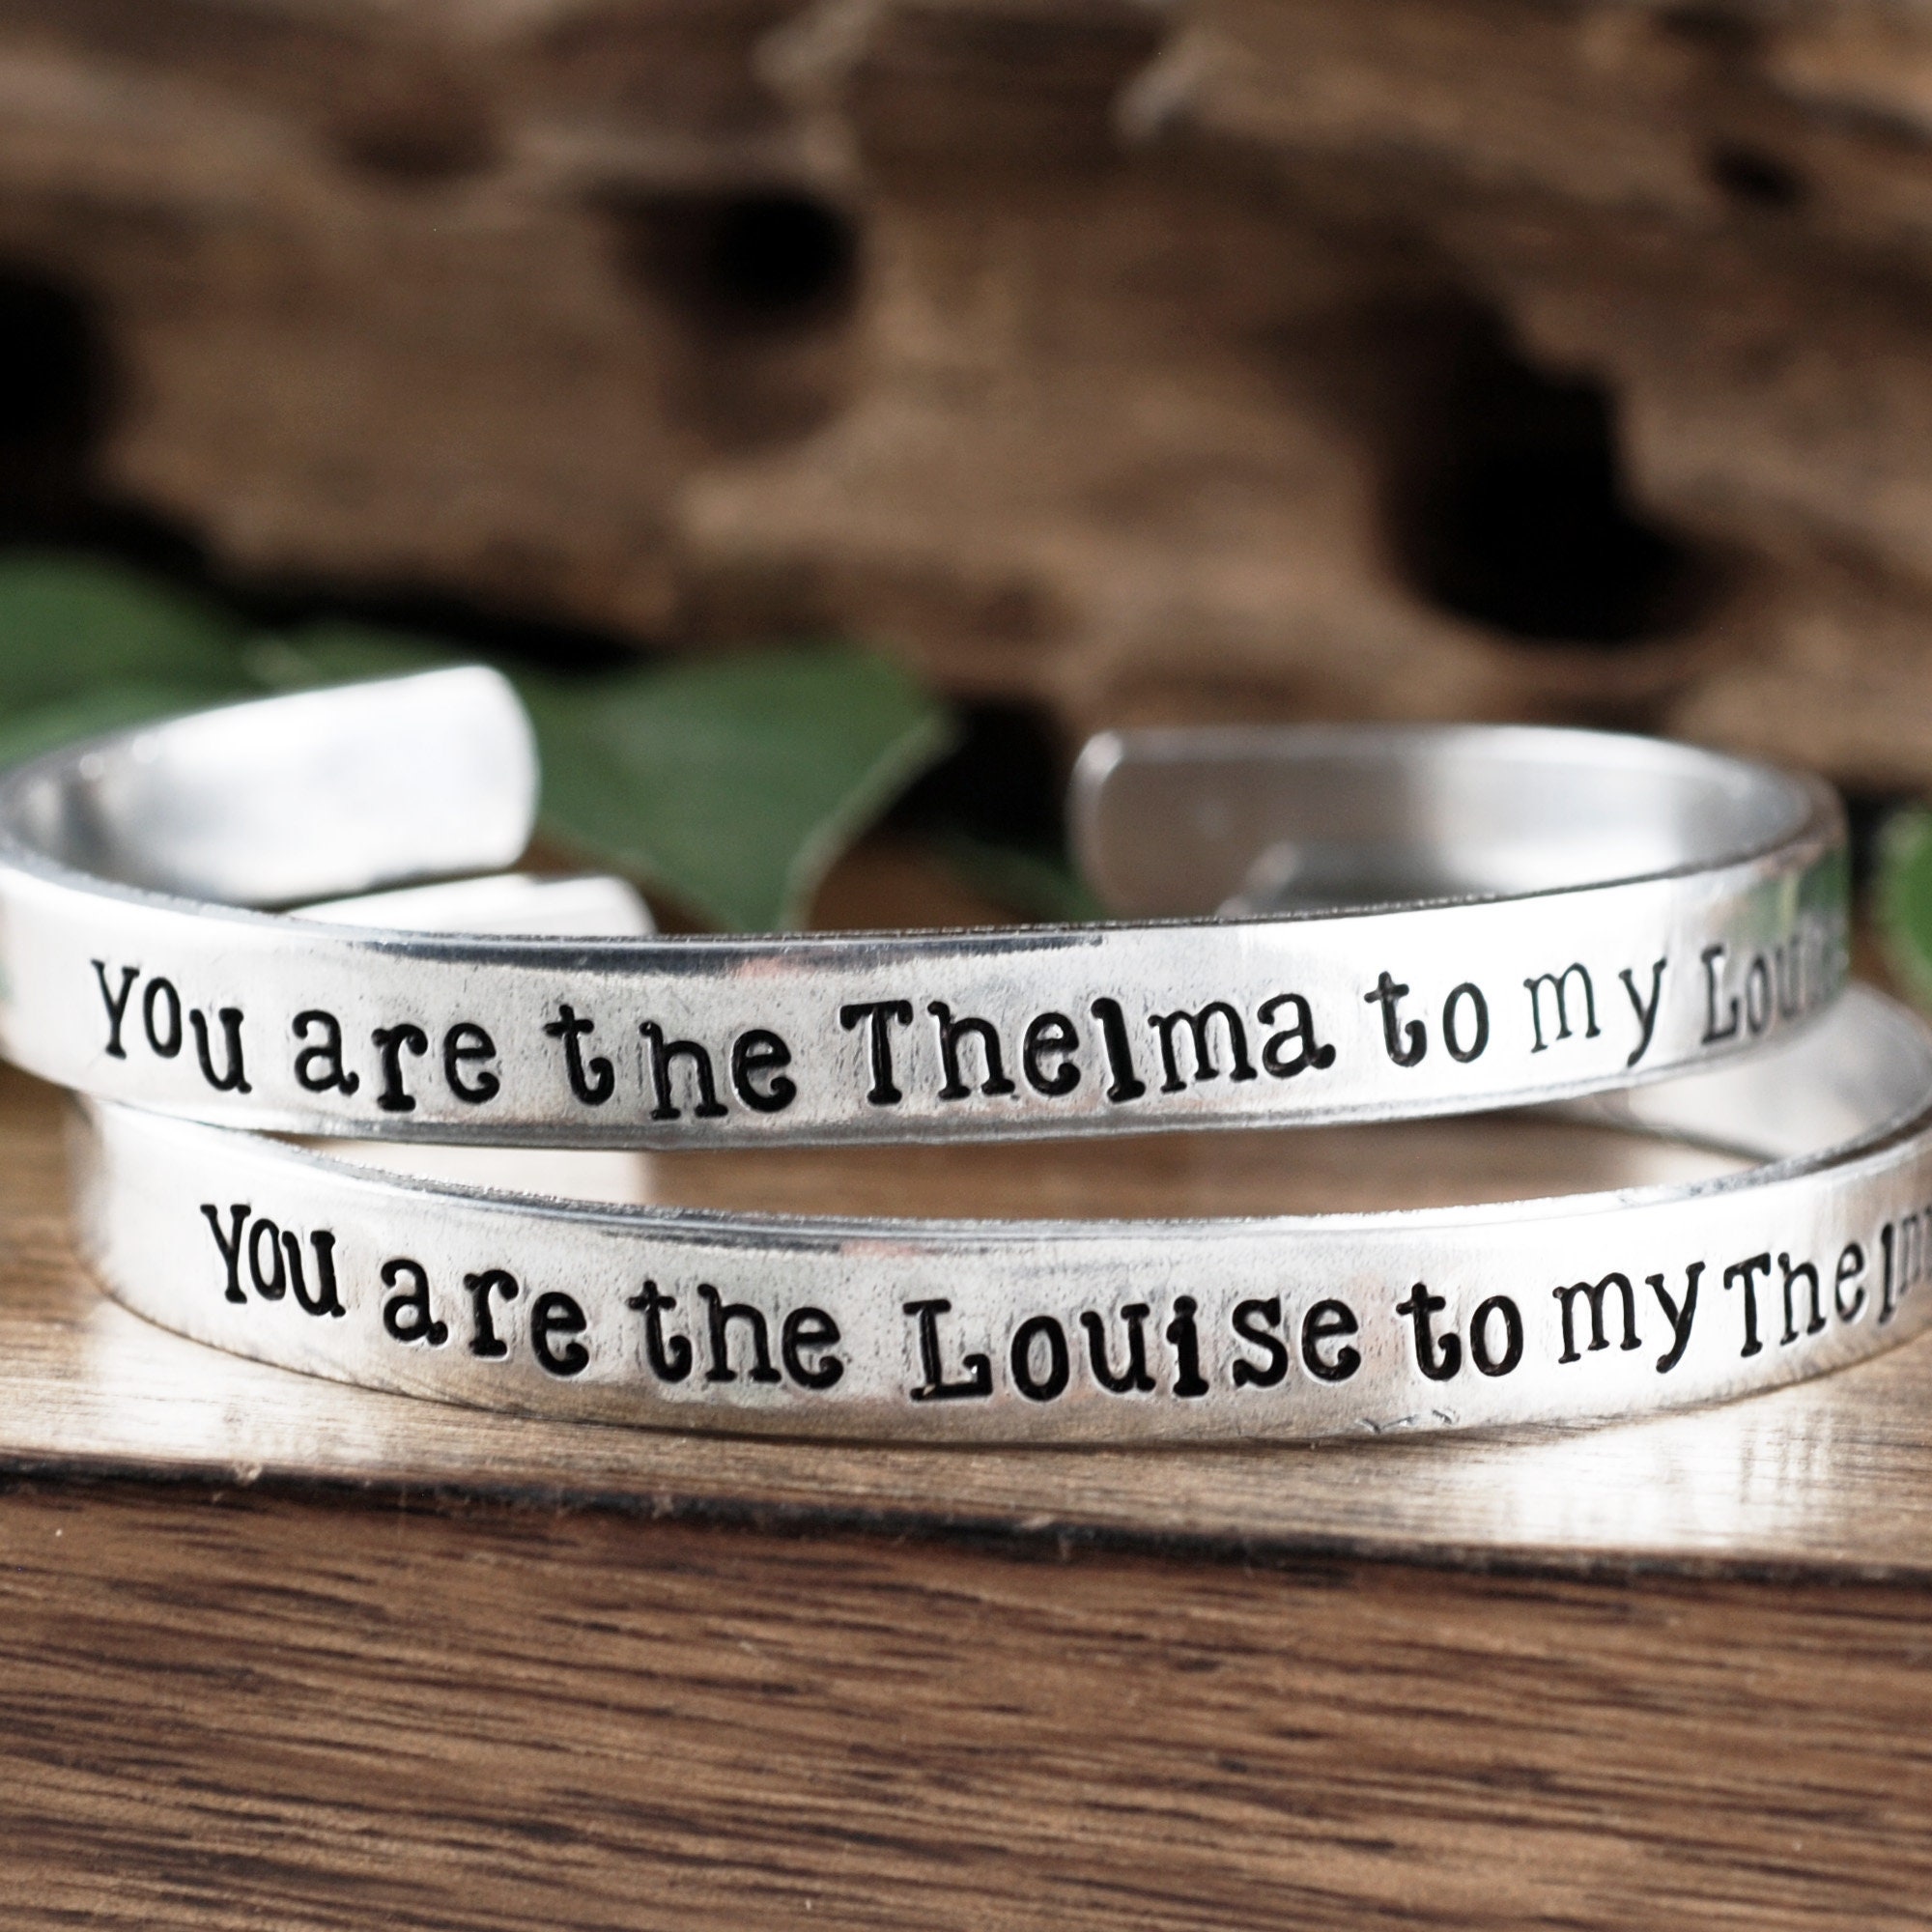 Thelma and Louise Gift,You Are The Thelma to My Louise, Best Friend Gifts, Friendship Jewelry, Friend Gift, Gift for BFF, Motivational Gift